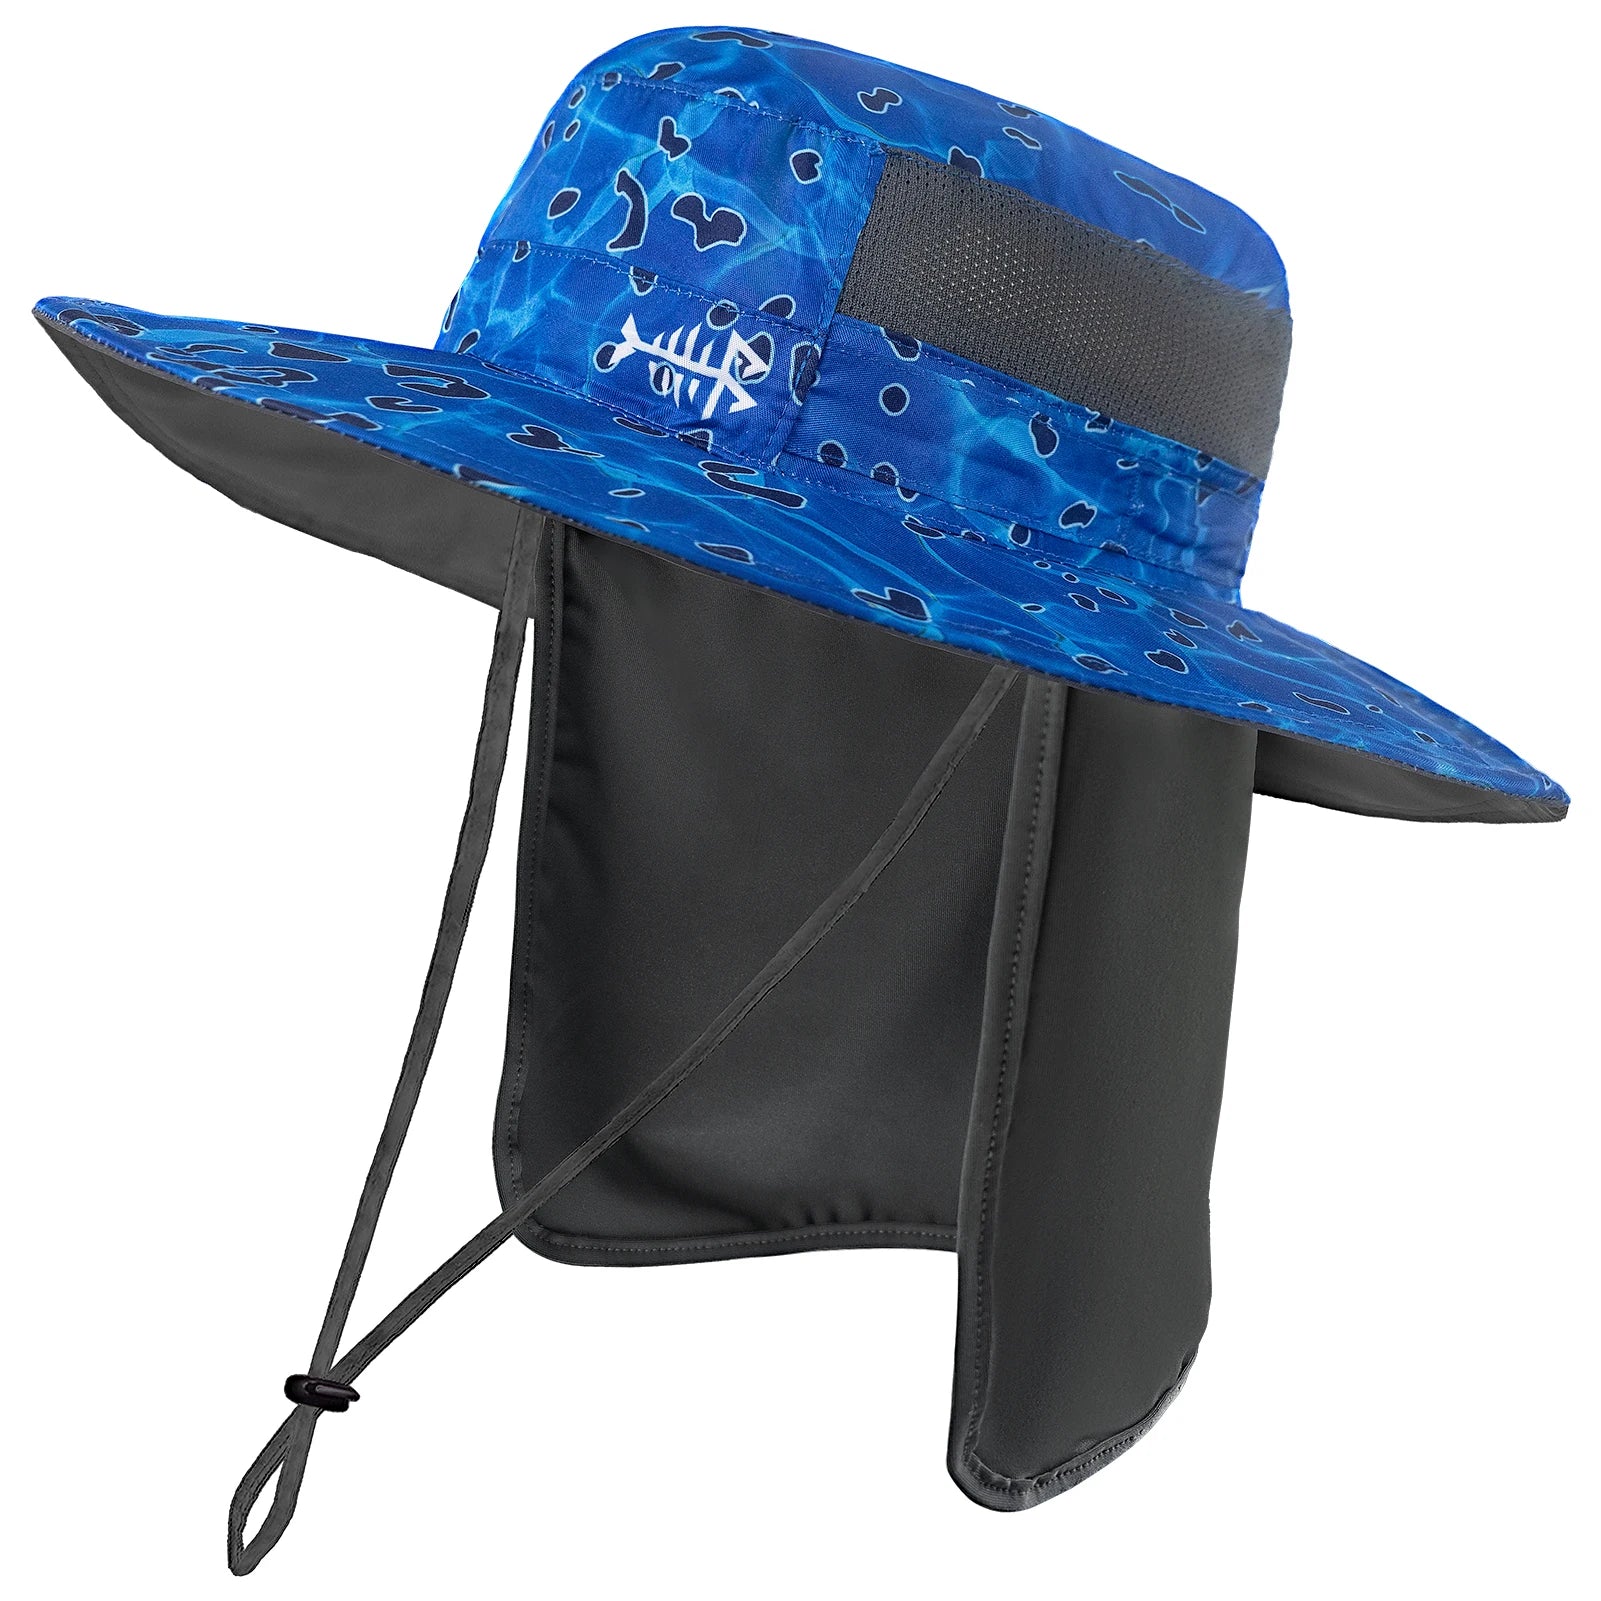 Blue camouflage fishing hat mesh air ventilation on the side of the head.  